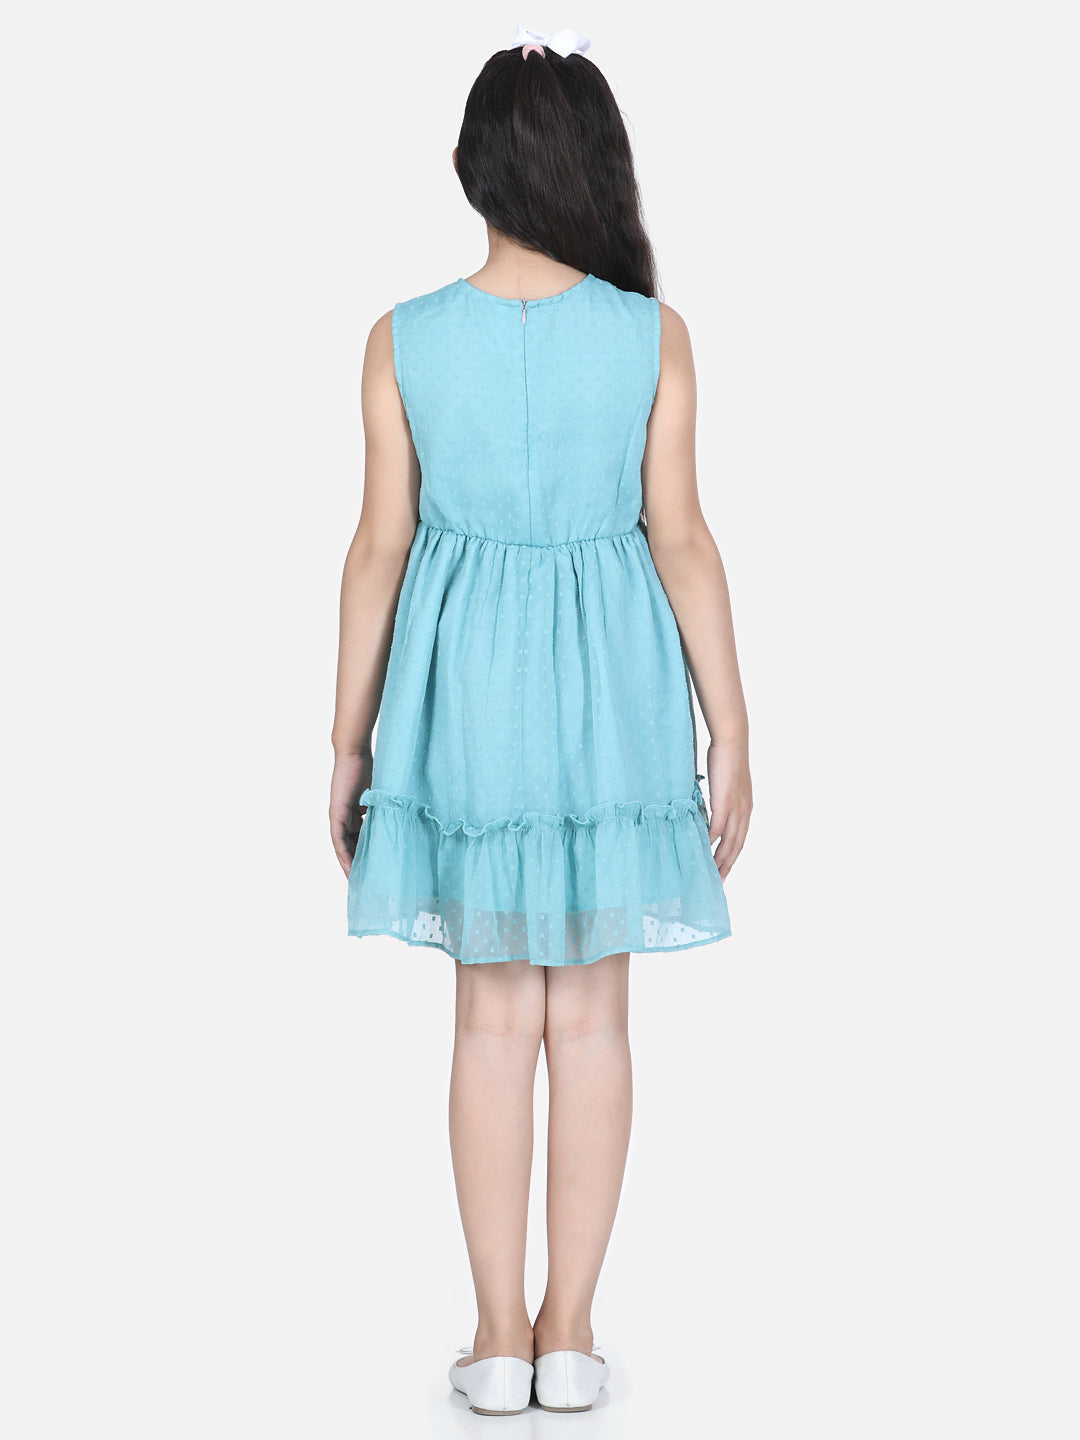 Girls Blue Polyester Self Design Dress with Net and Lace Inserts